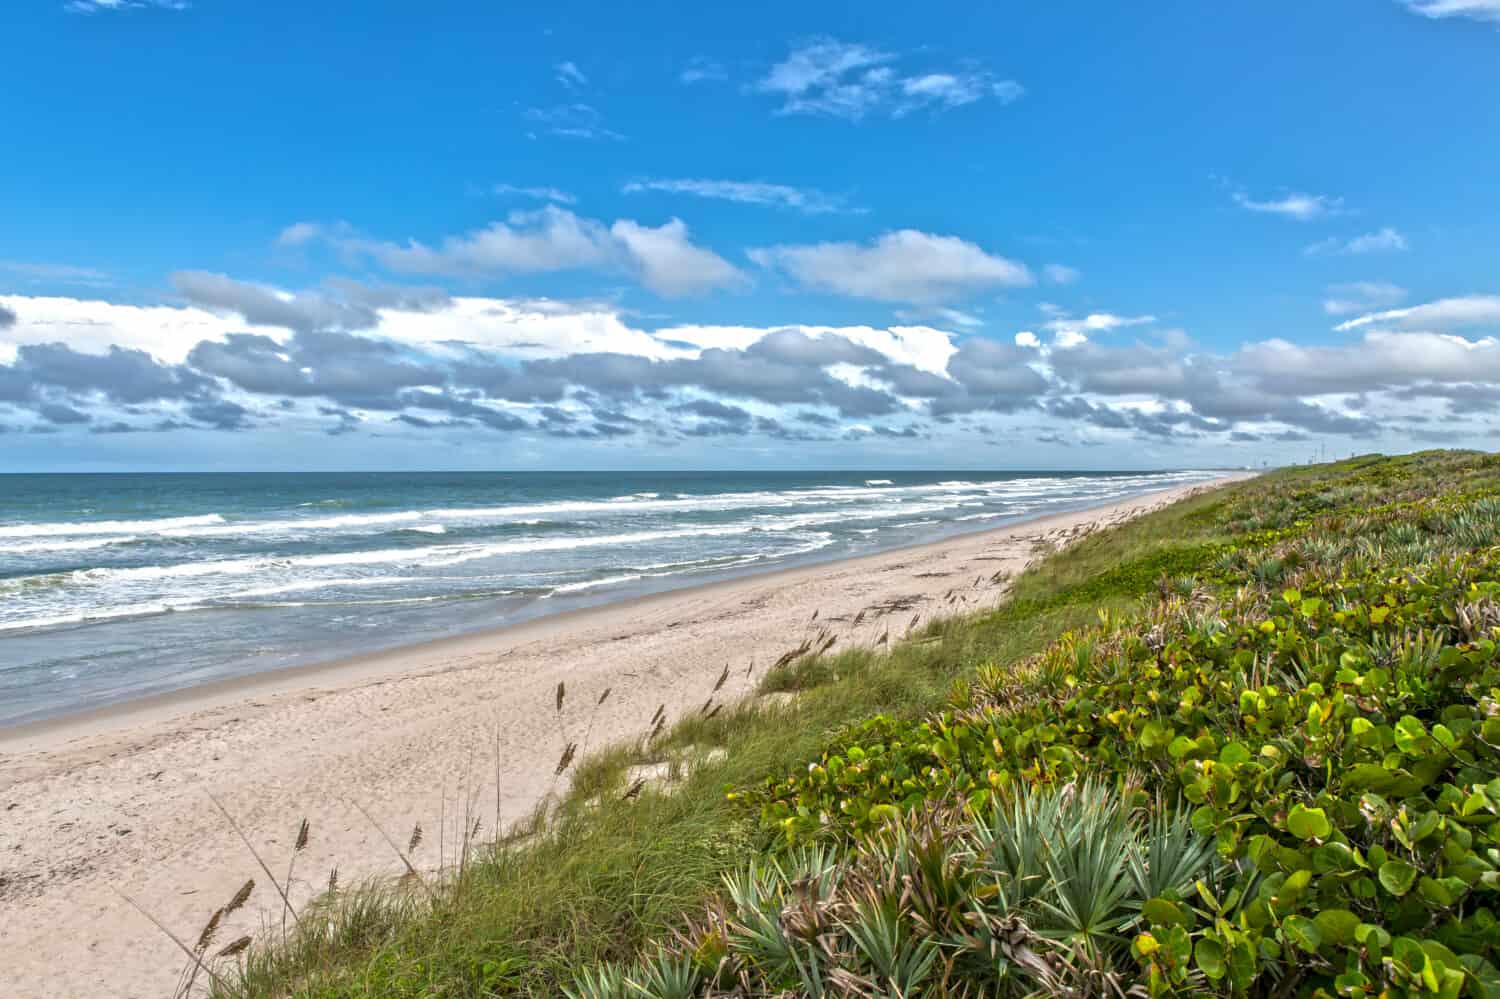 Beach at Canaveral National Seashore at Cape Canaveral, Florida by Susanne Pommer